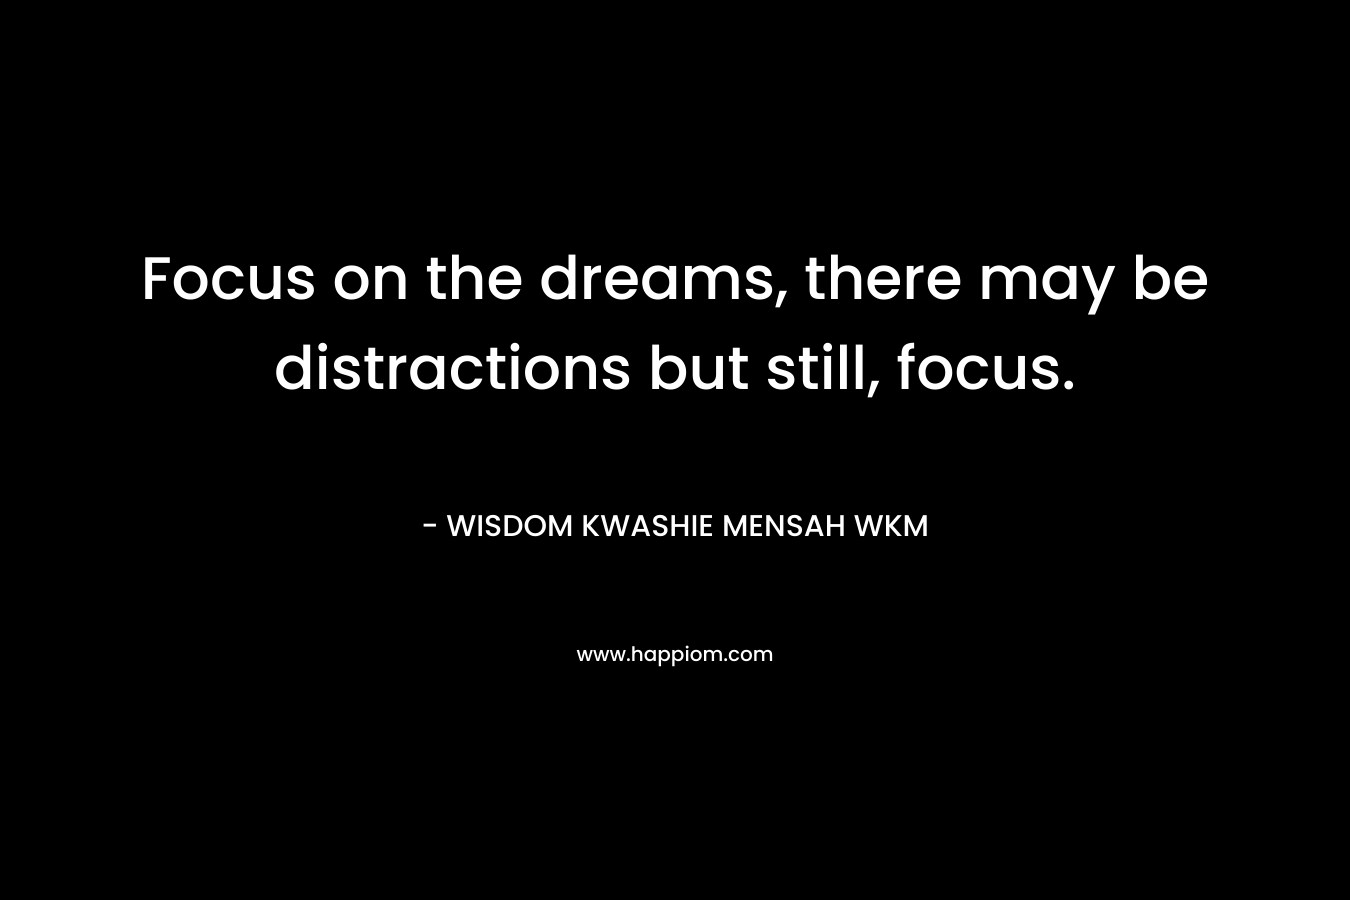 Focus on the dreams, there may be distractions but still, focus. – WISDOM KWASHIE MENSAH WKM